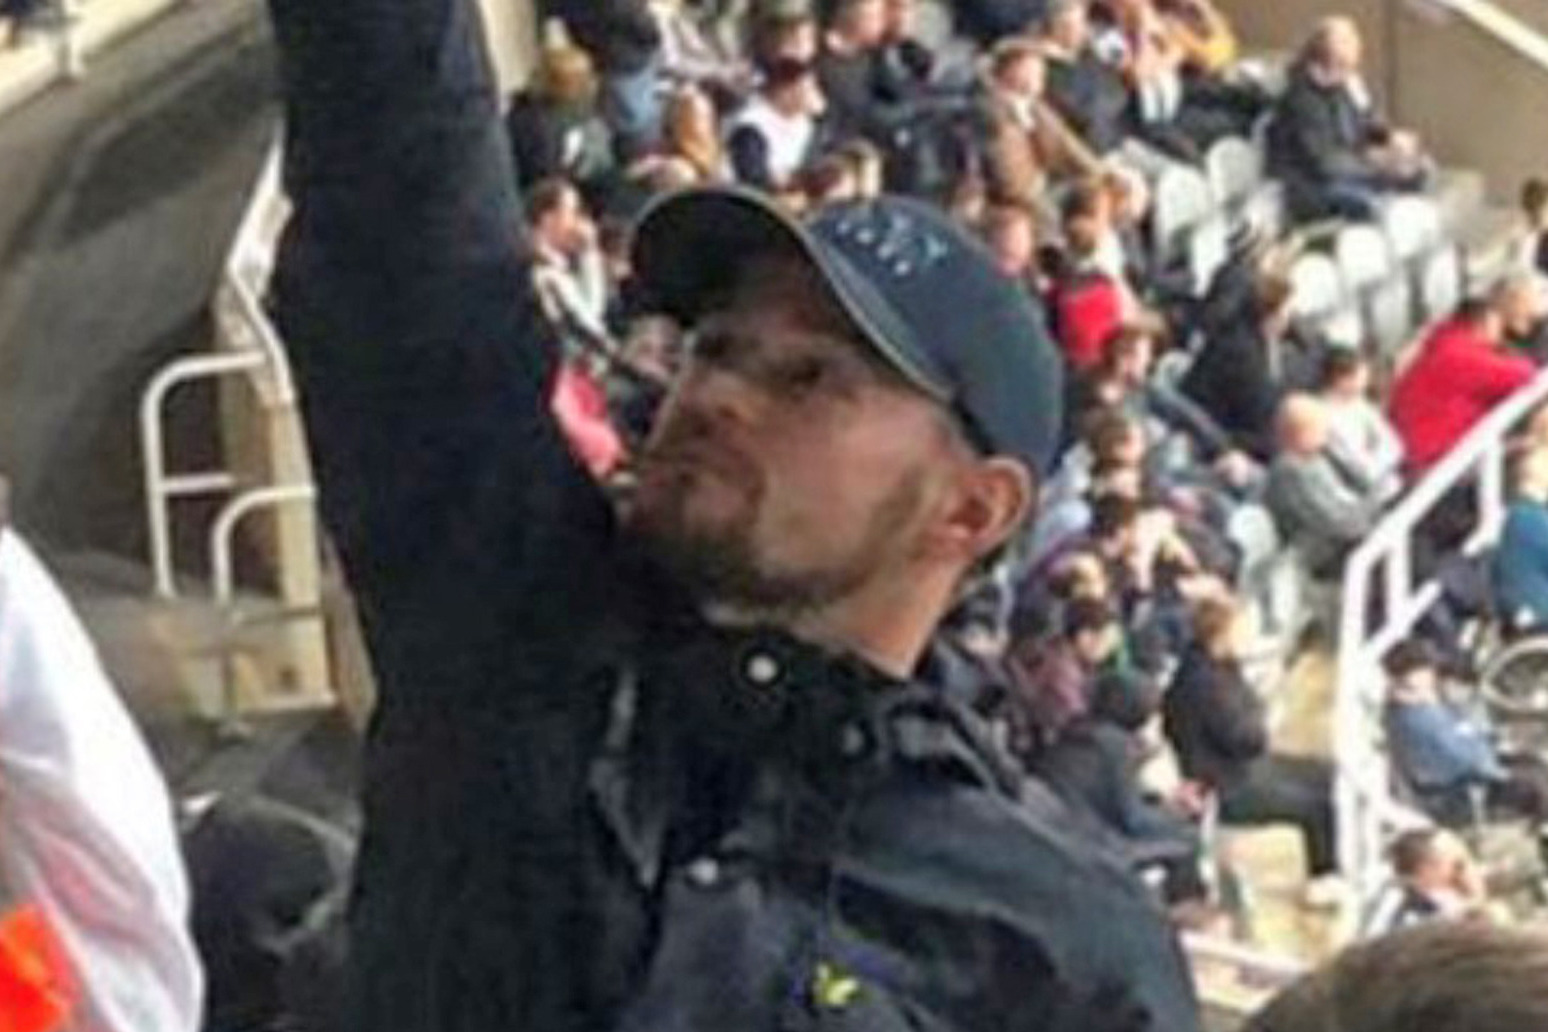 Police seek help to identify fan who made ‘racist gesture’ at Newcastle game 